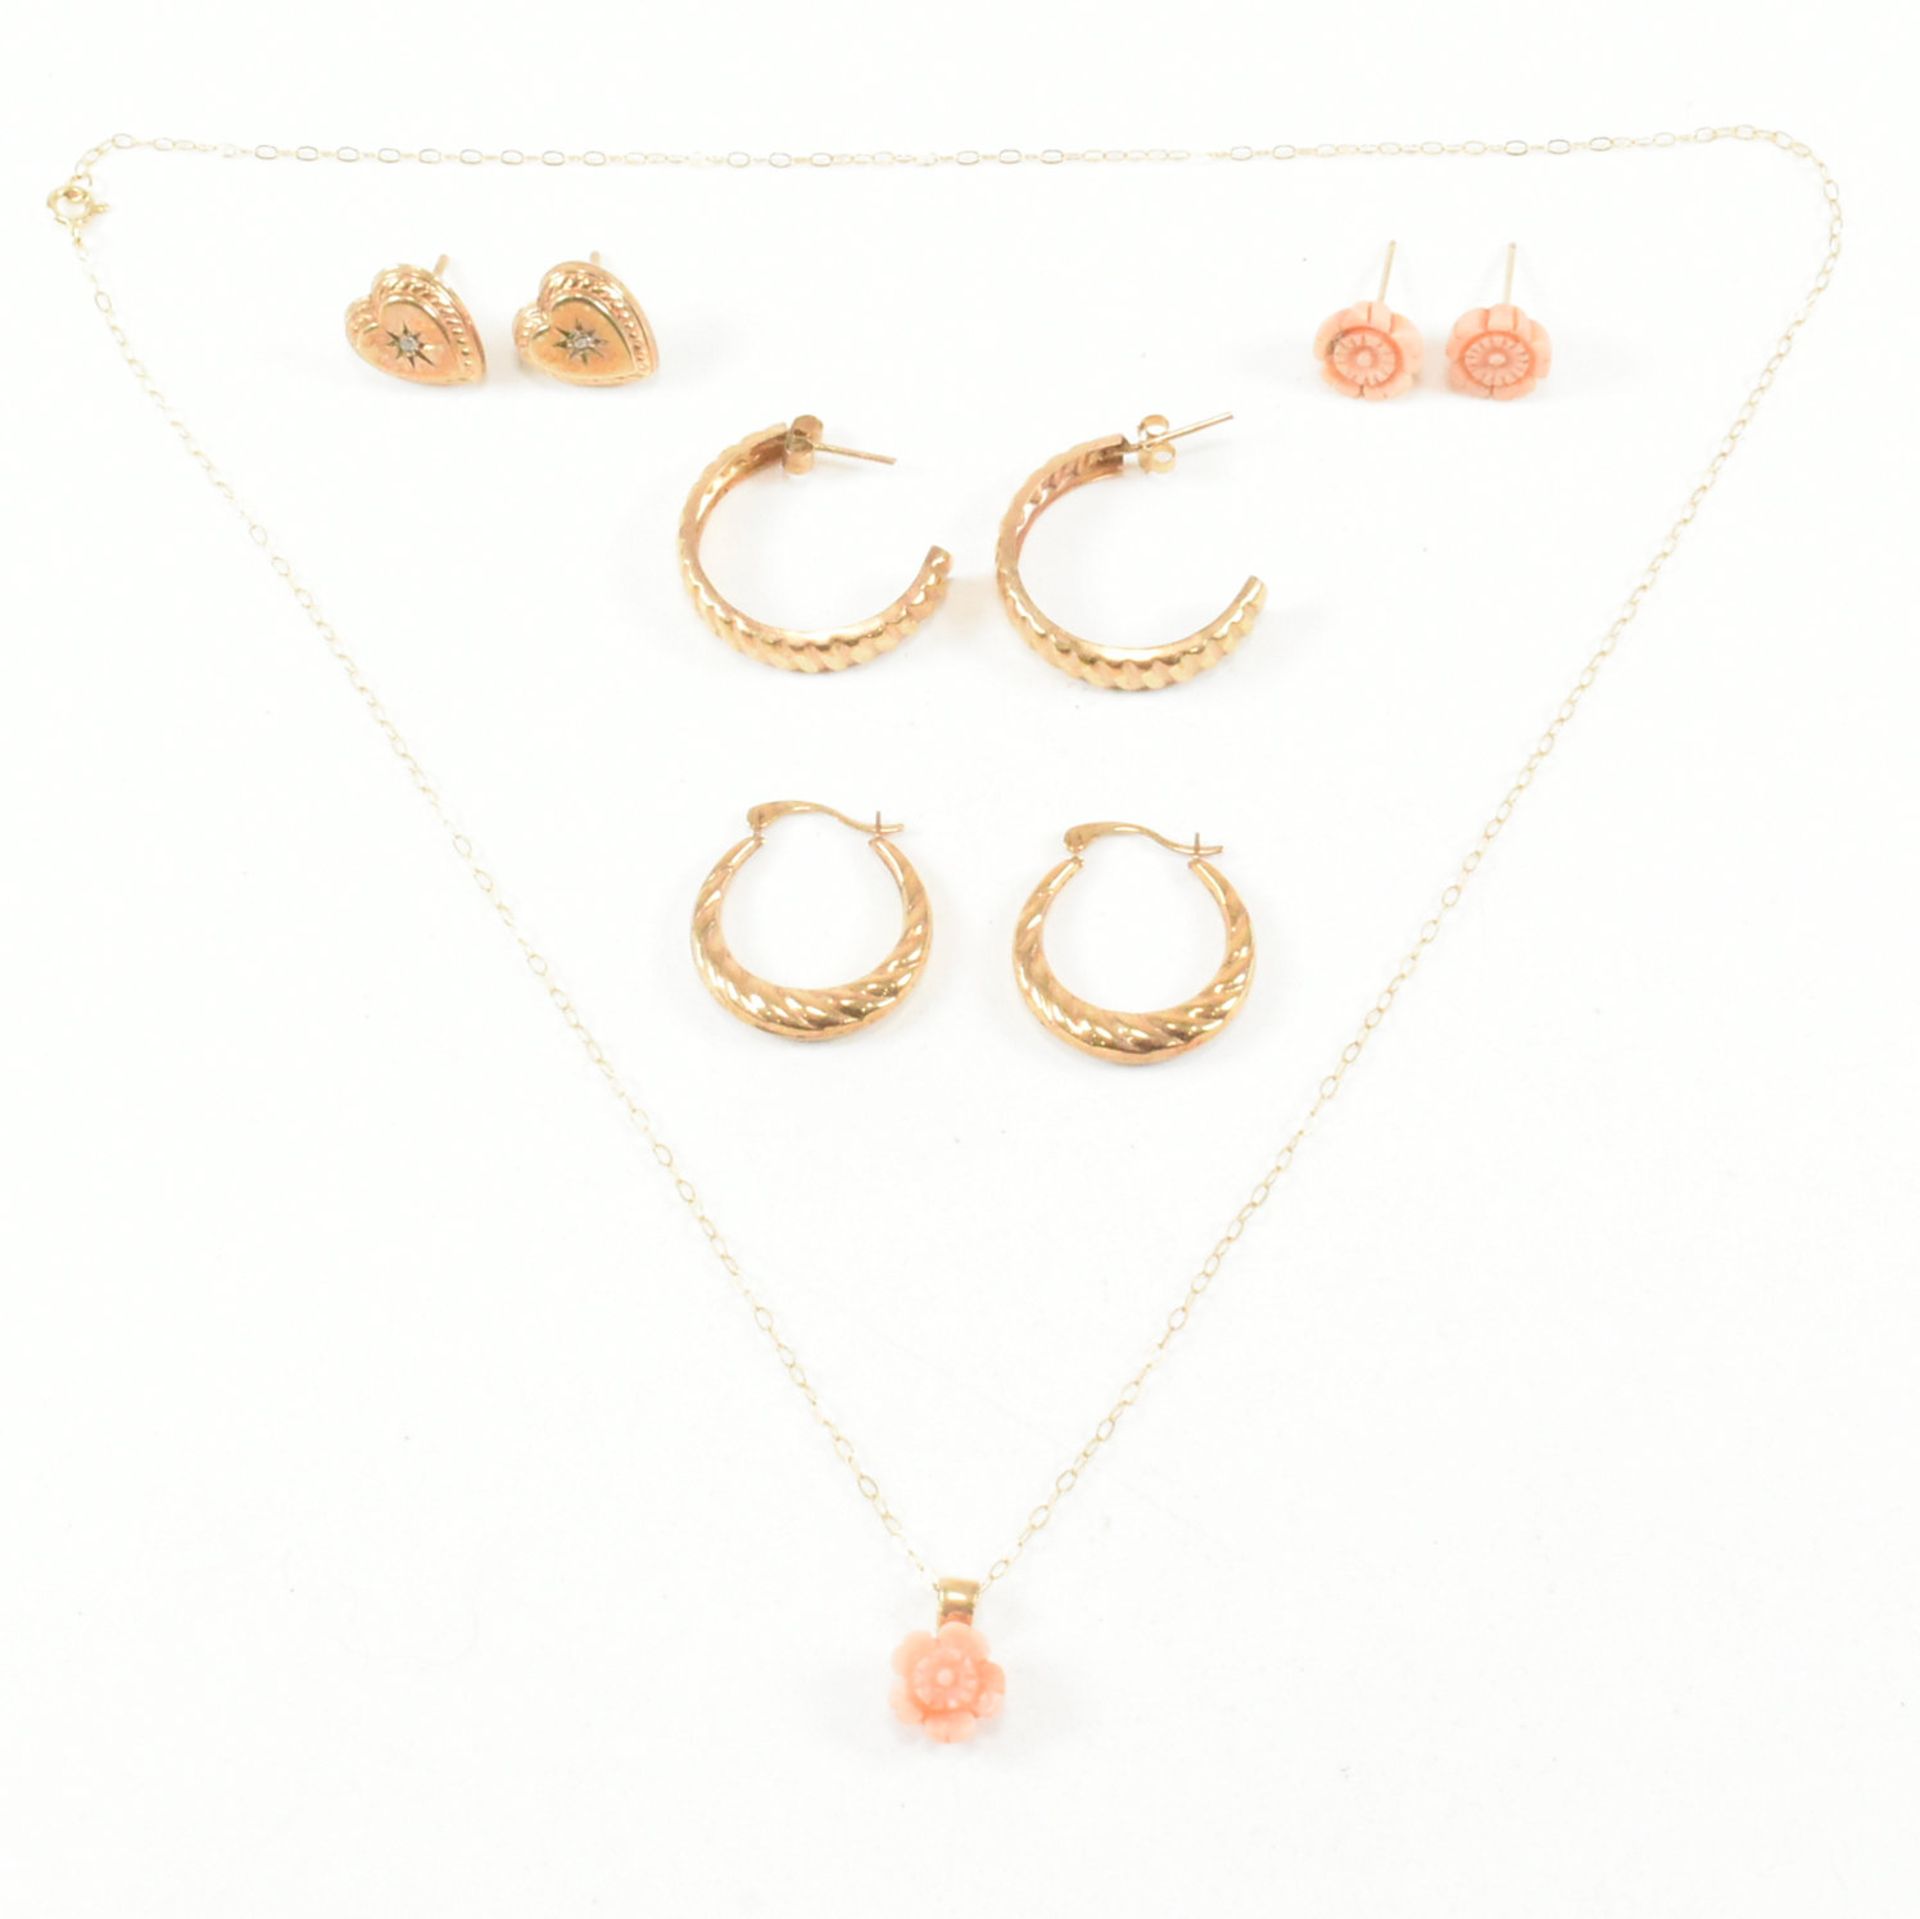 FOUR PAIRS OF 9CT GOLD EARRINGS & A 9CT GOLD PENDANT NECKLACE - Image 8 of 8